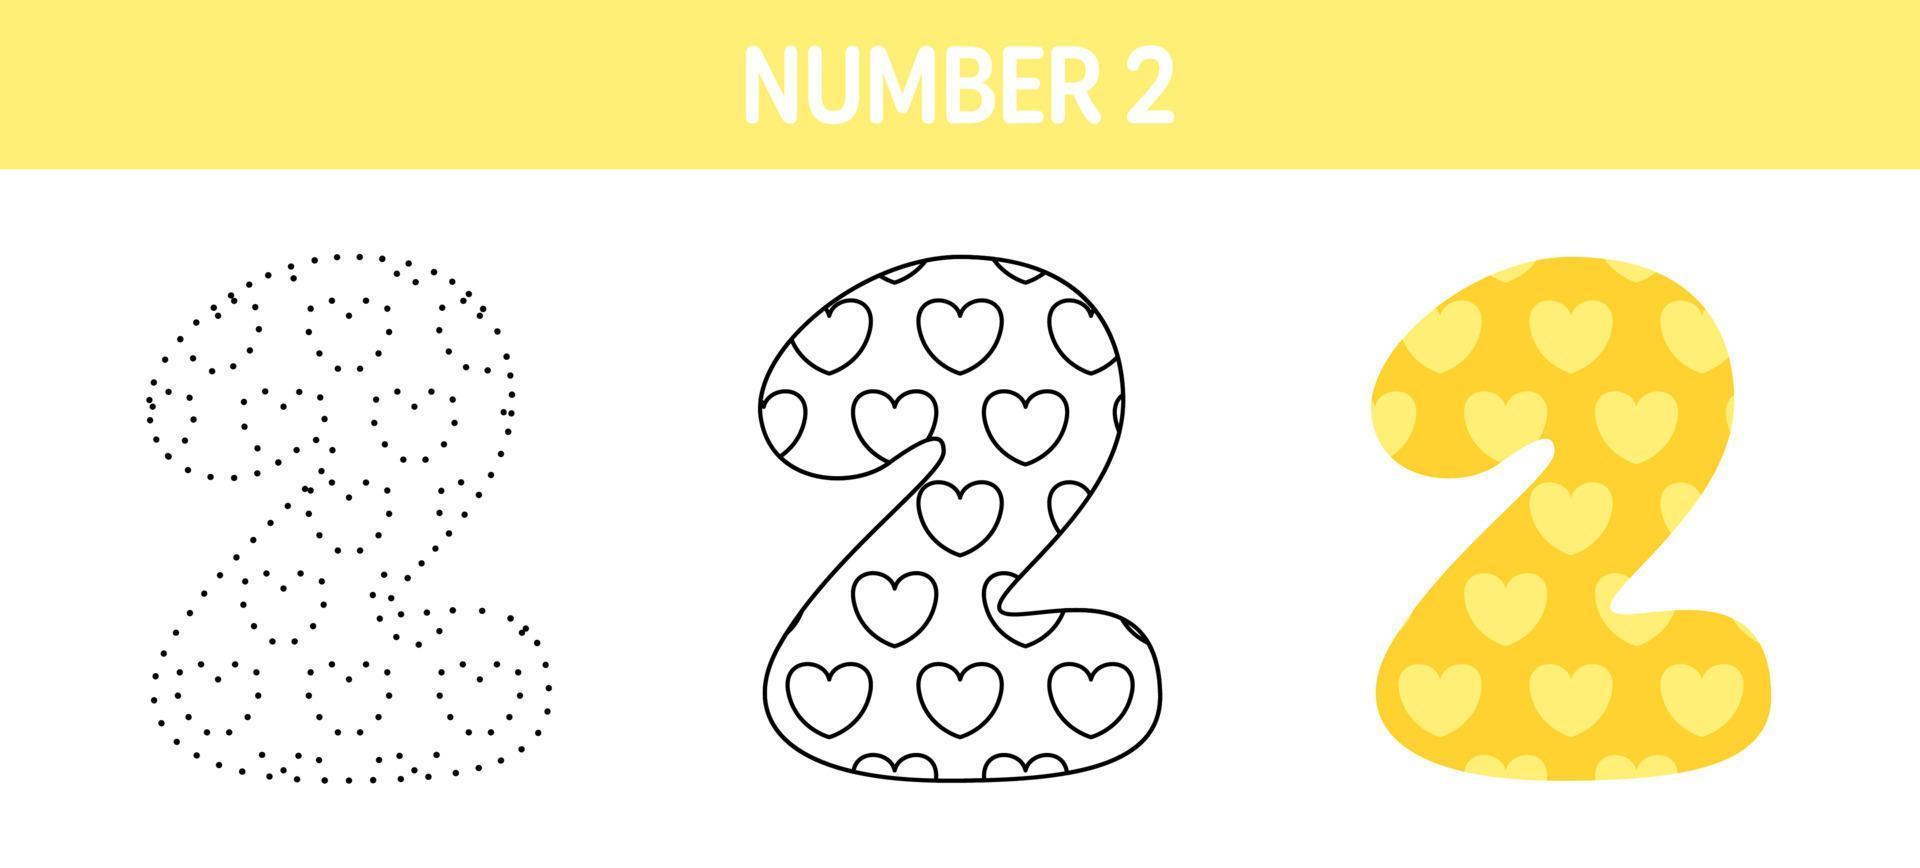 Number 2 tracing and coloring worksheet for kids vector